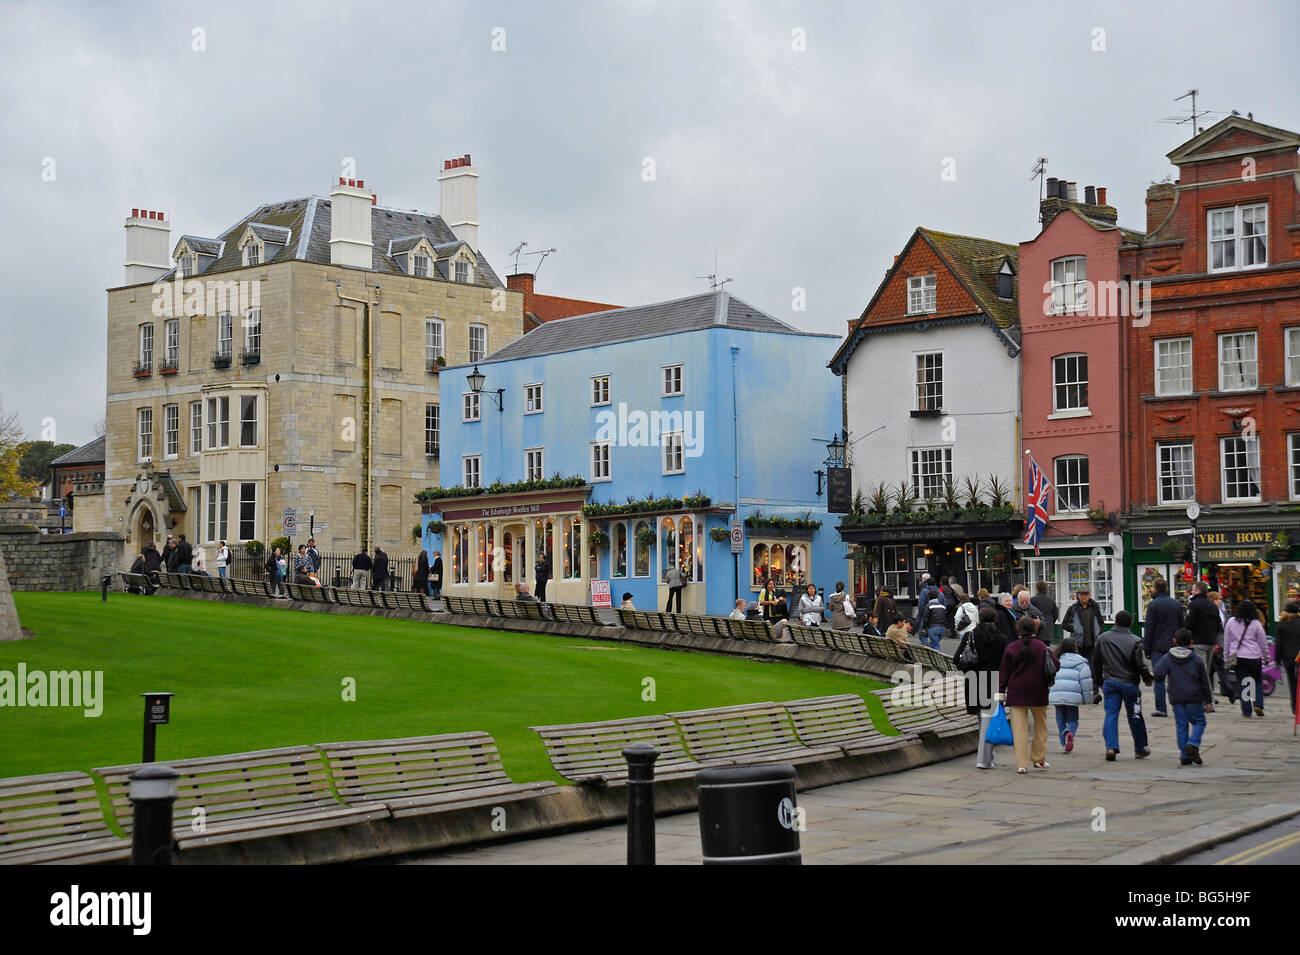 Busy street scene at Windsor town, Berkshire, England. Stock Photo